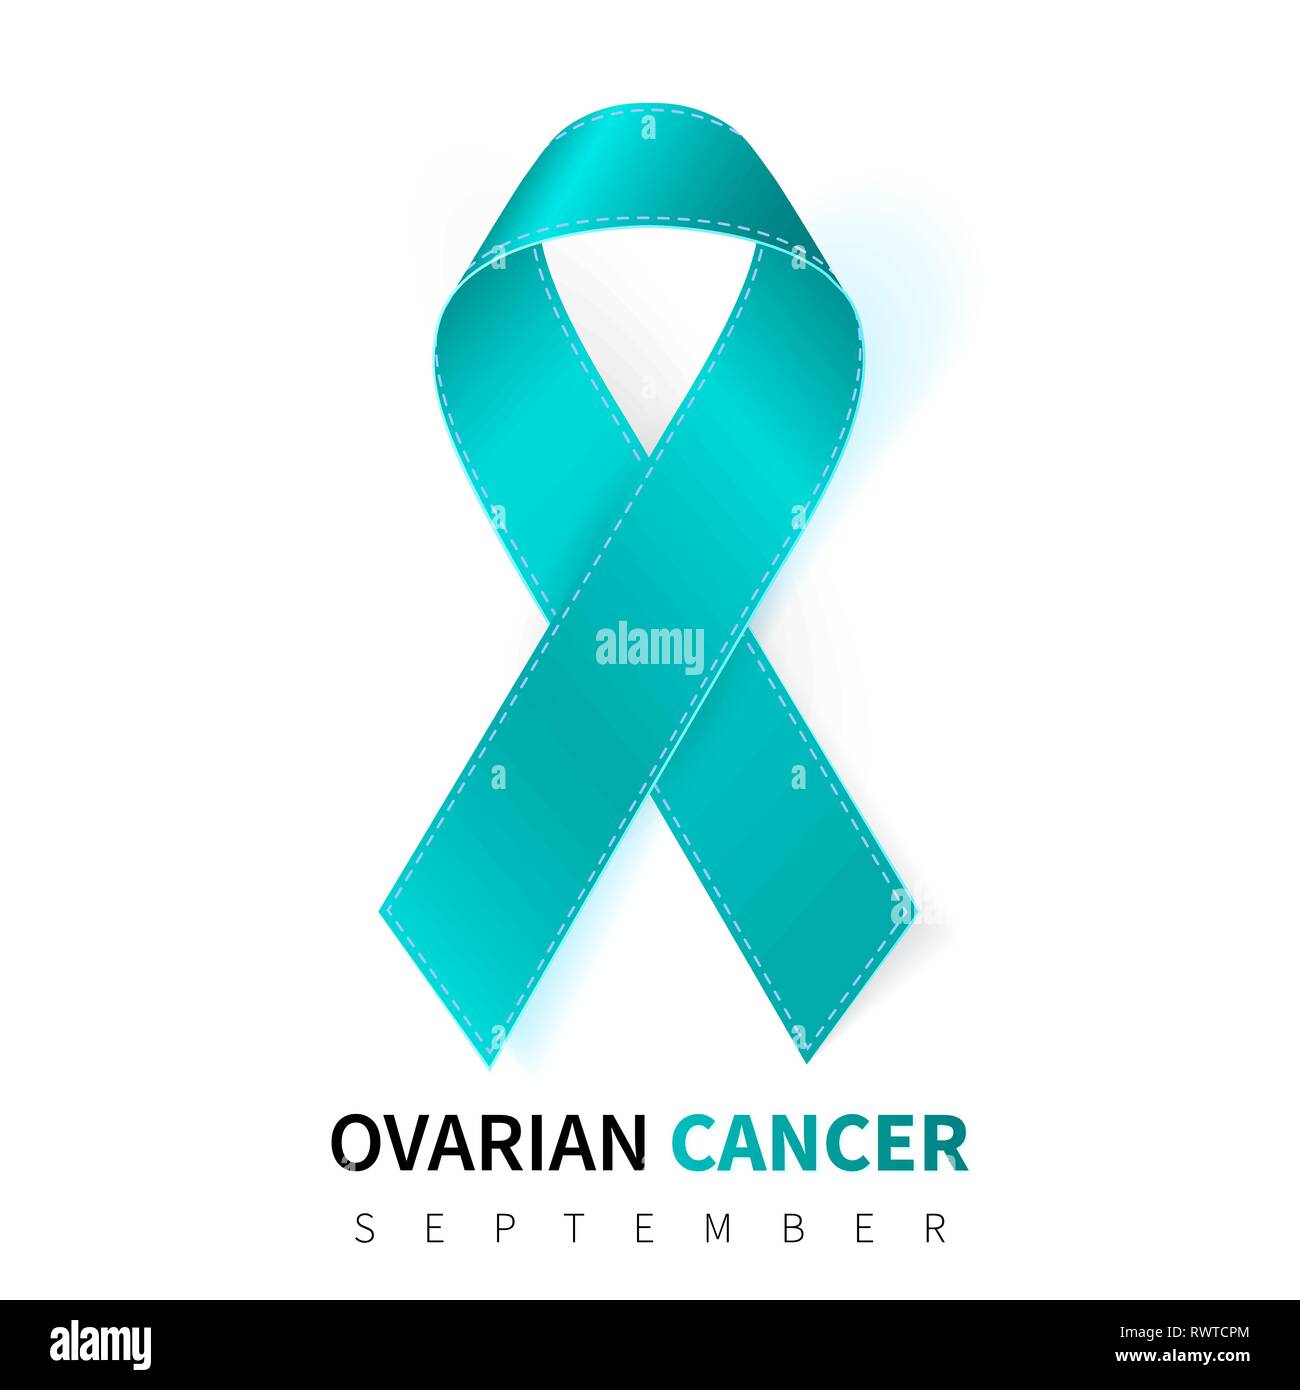 Ovarian Cancer Ribbon High Resolution Stock Photography and Images - Alamy